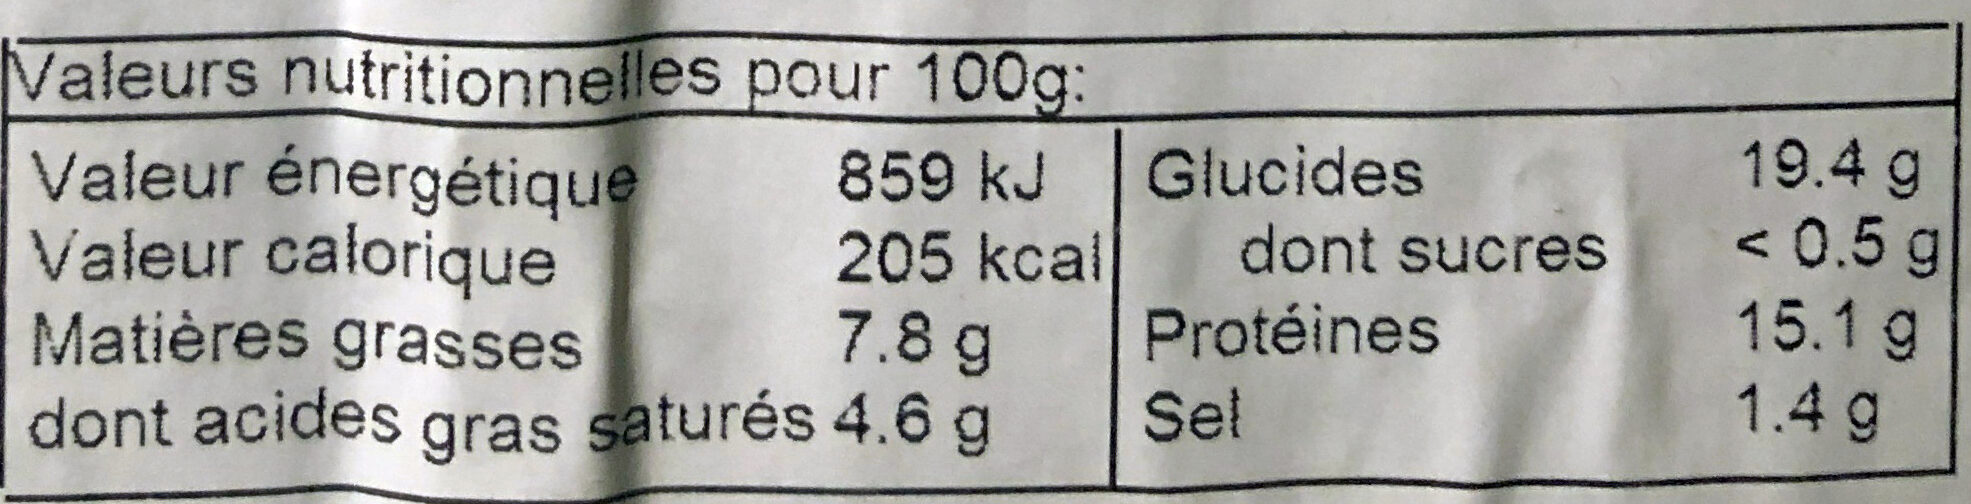 Galette jambon fromage bio - Nutrition facts - fr